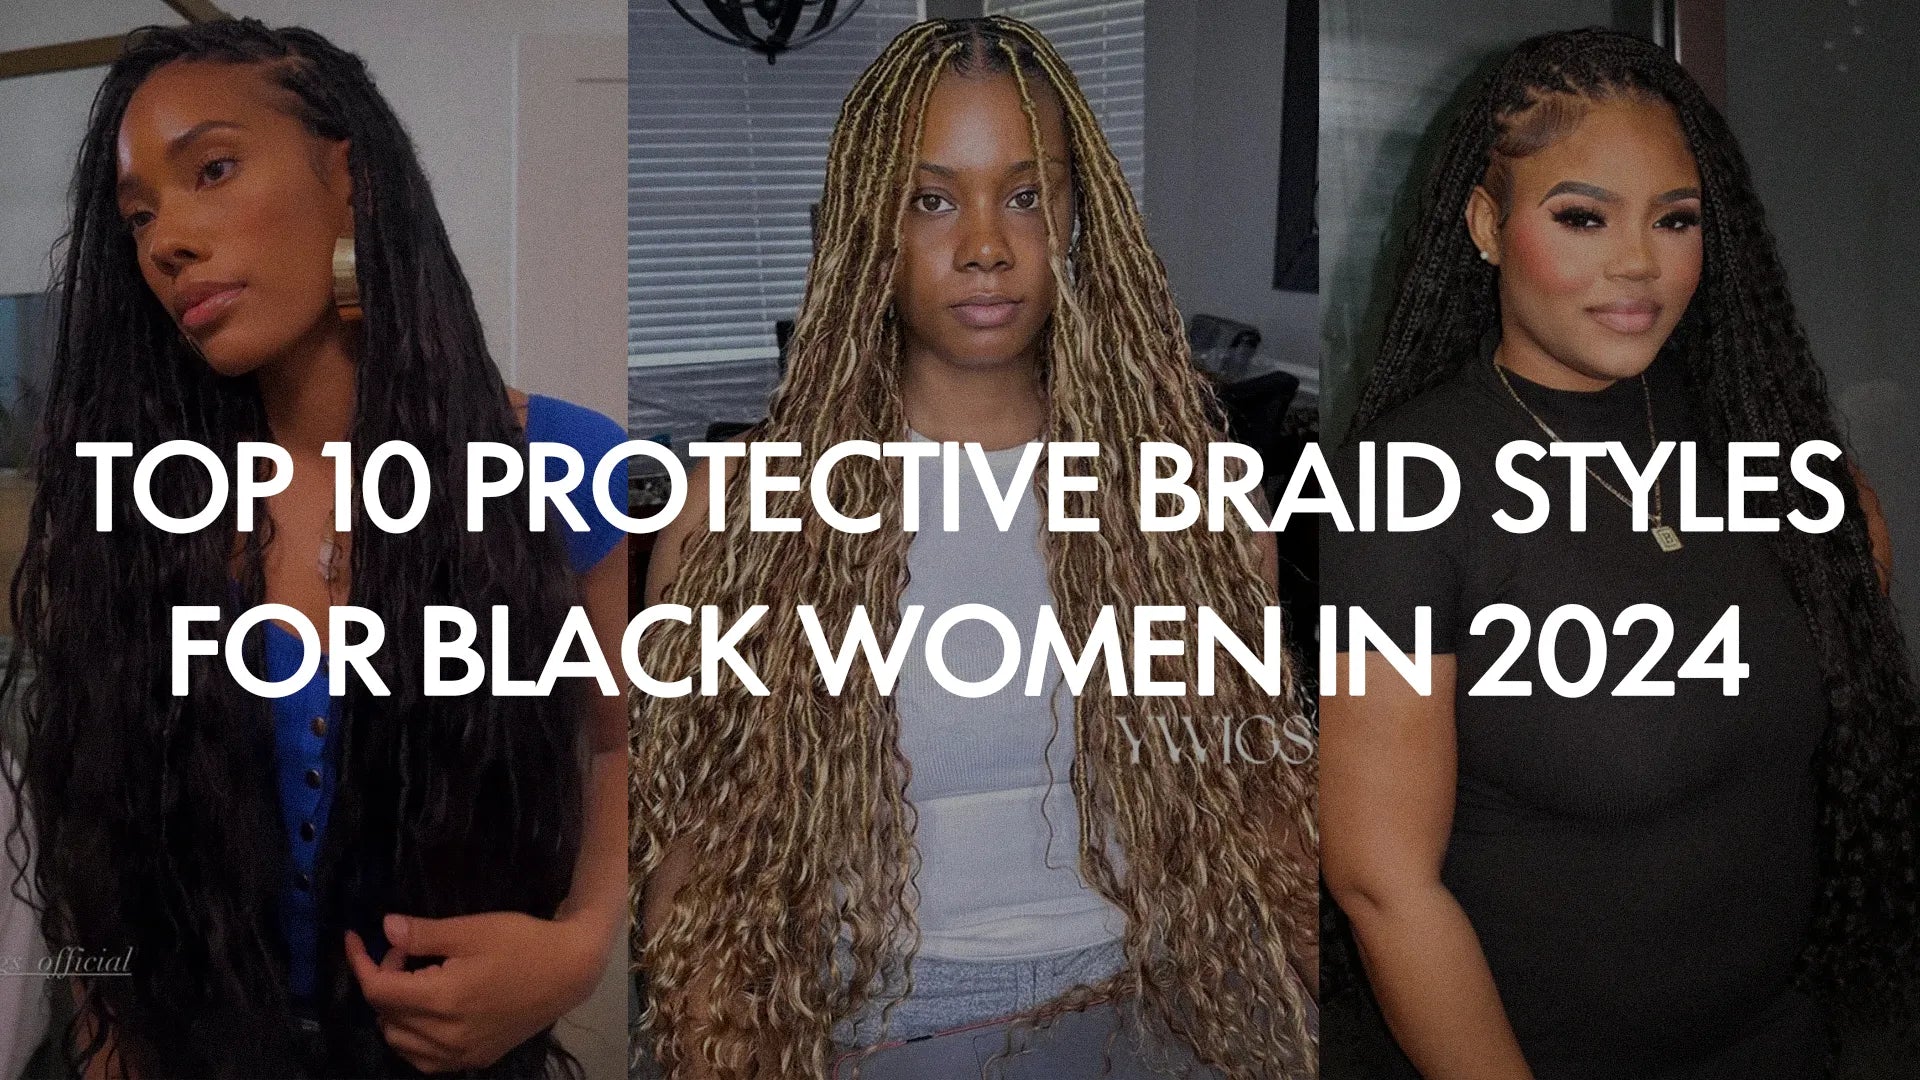 Top 10 Protective Braid Styles for Black Women in 2024